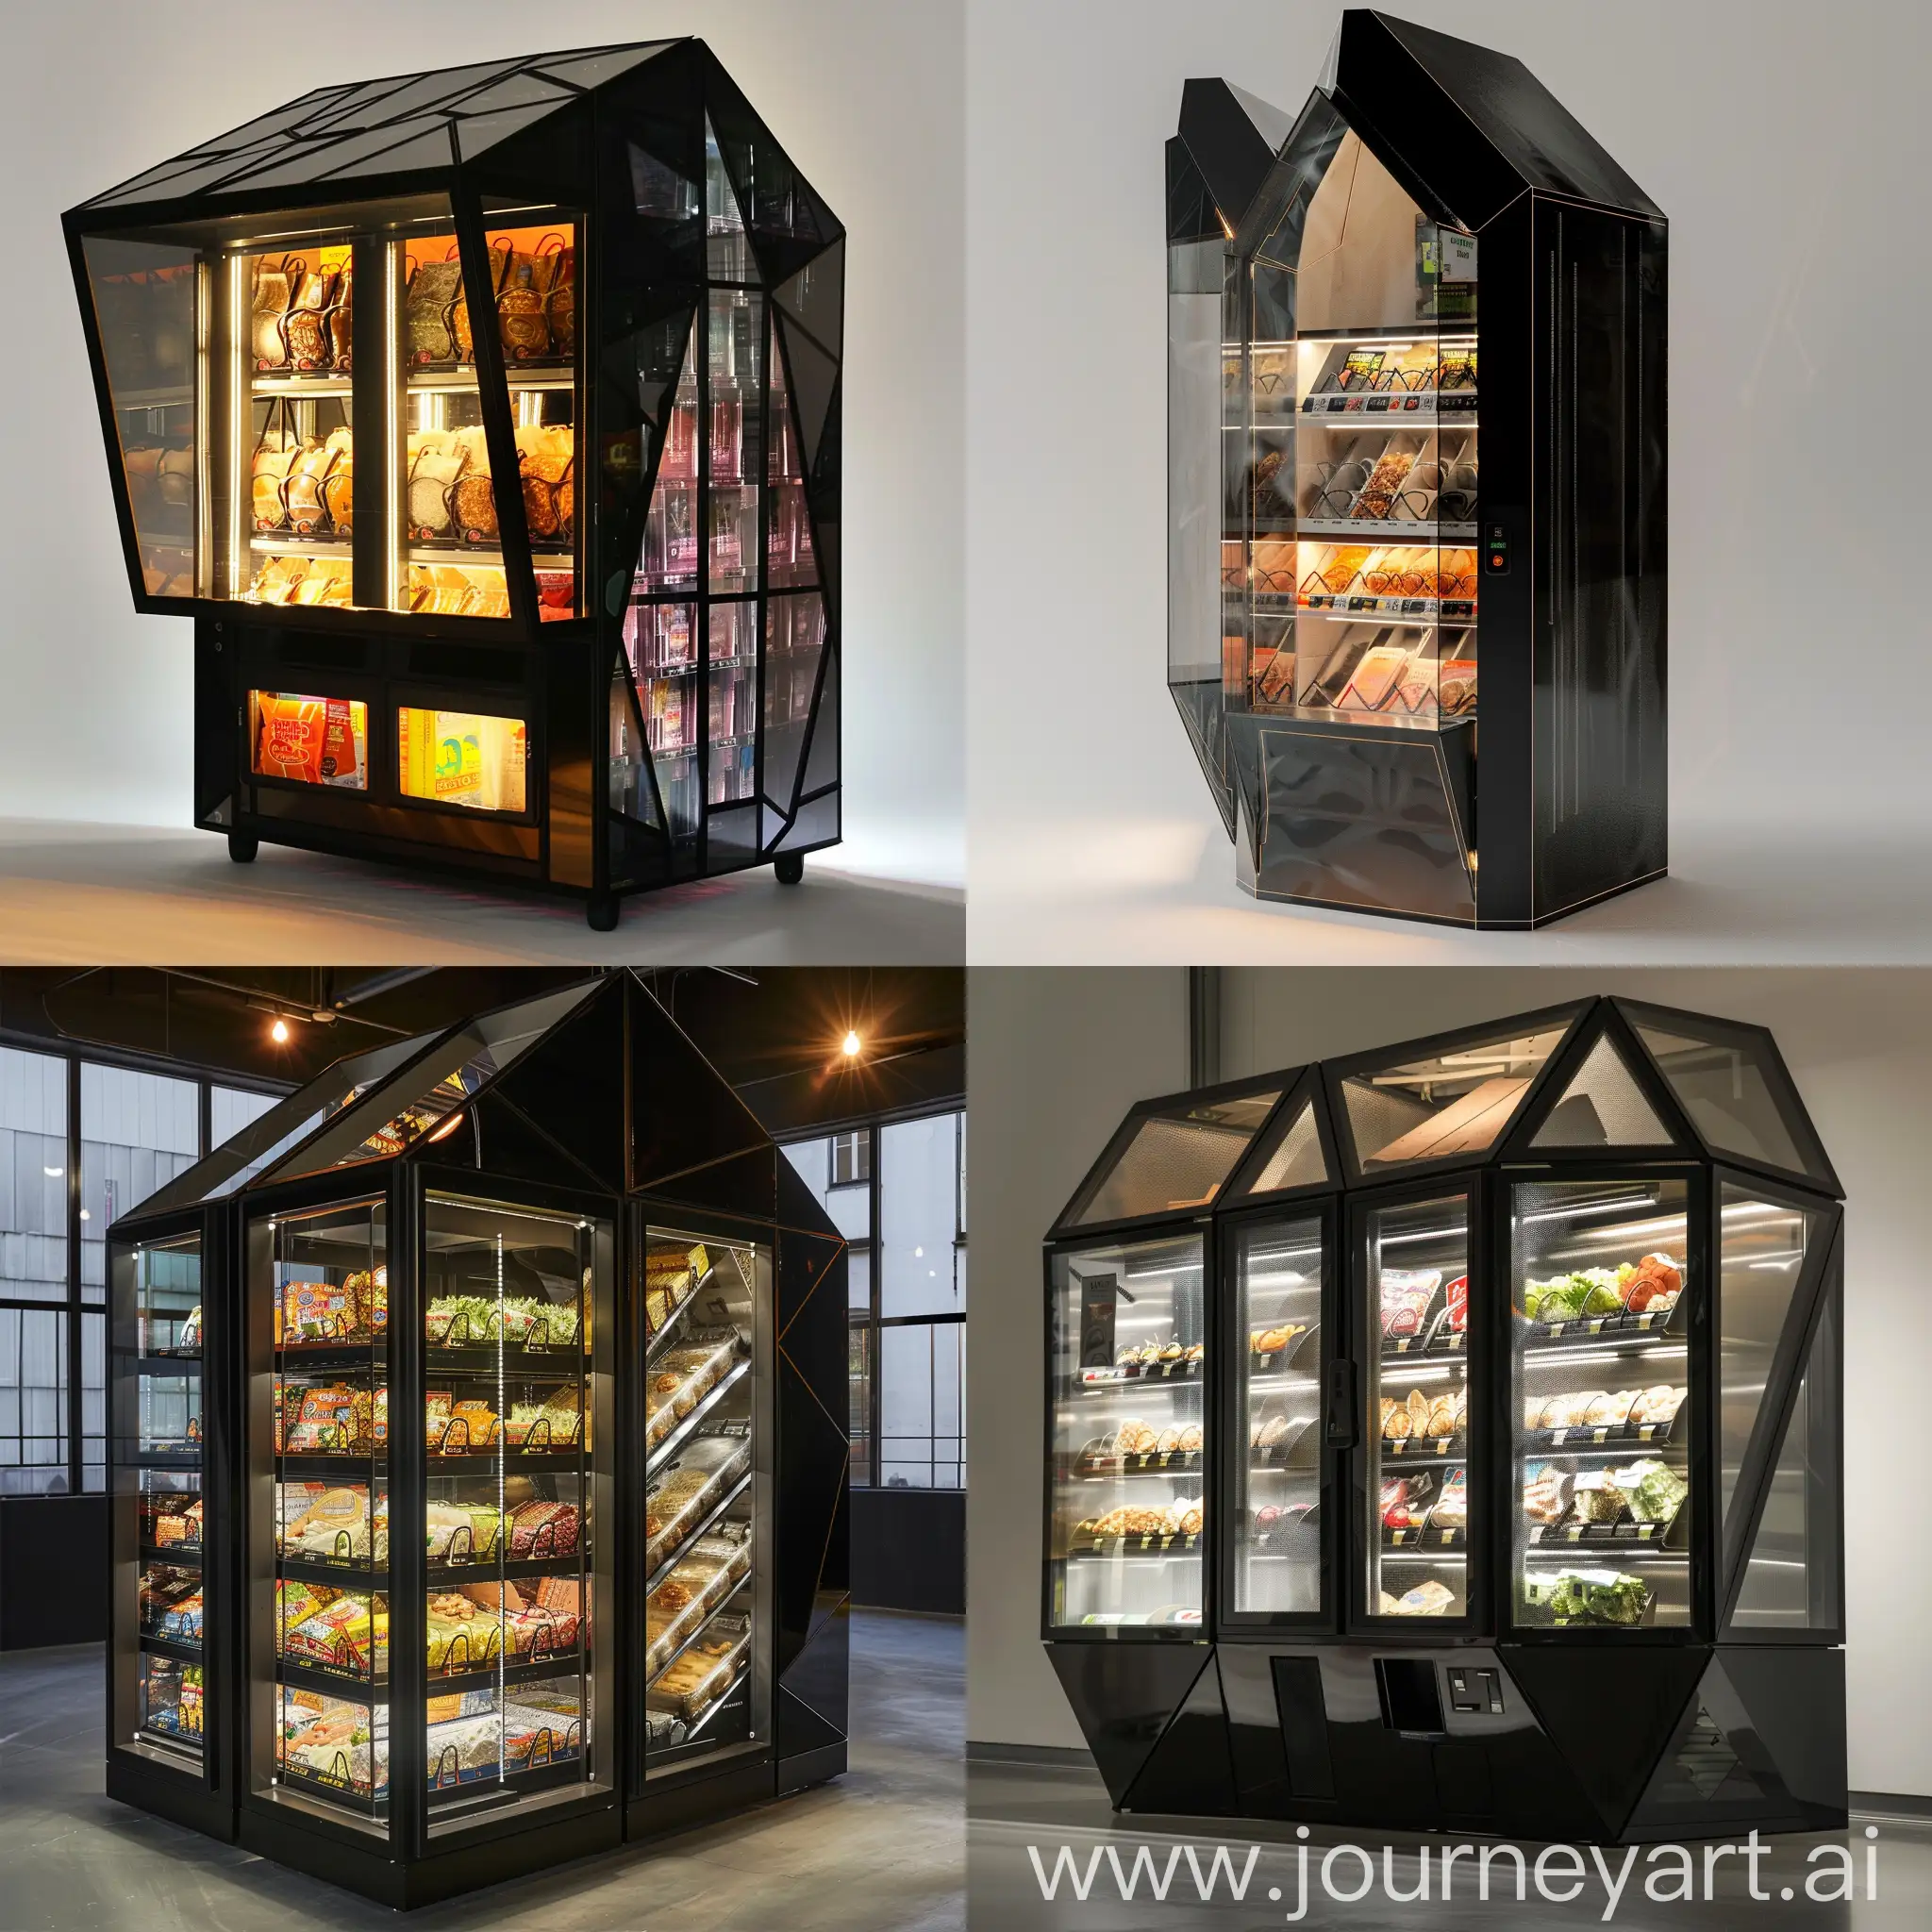 design me a frozen food vending machine as big as a newsstand with a unique architectural style in black glass and a play of light